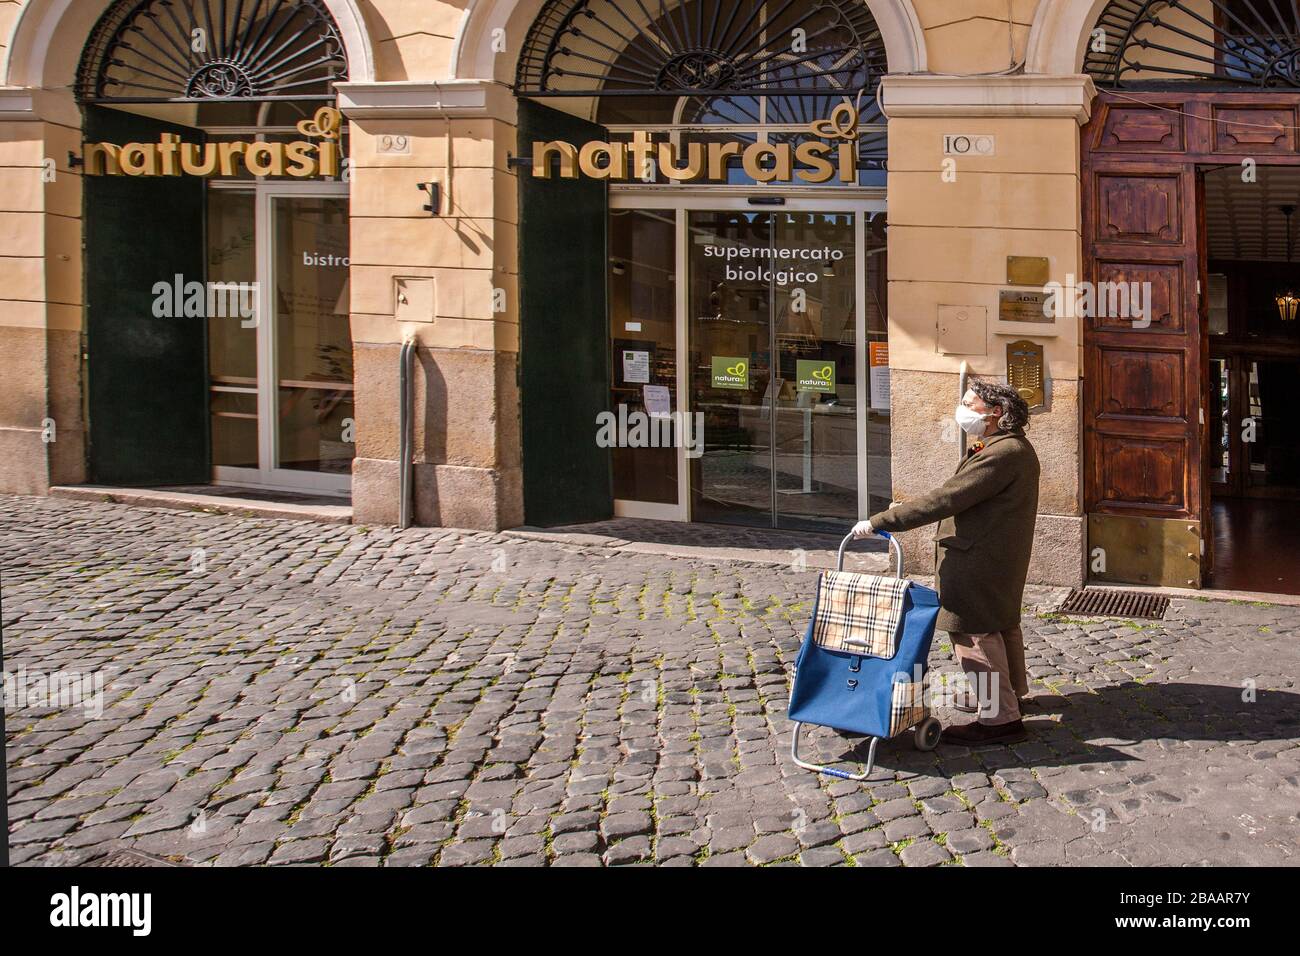 Rome March 25th 2020 Rome during the Coronavirus pandemic. people wearing mask in line at the shop in Piazza Farnese  Photo by Elio Castoria Stock Photo